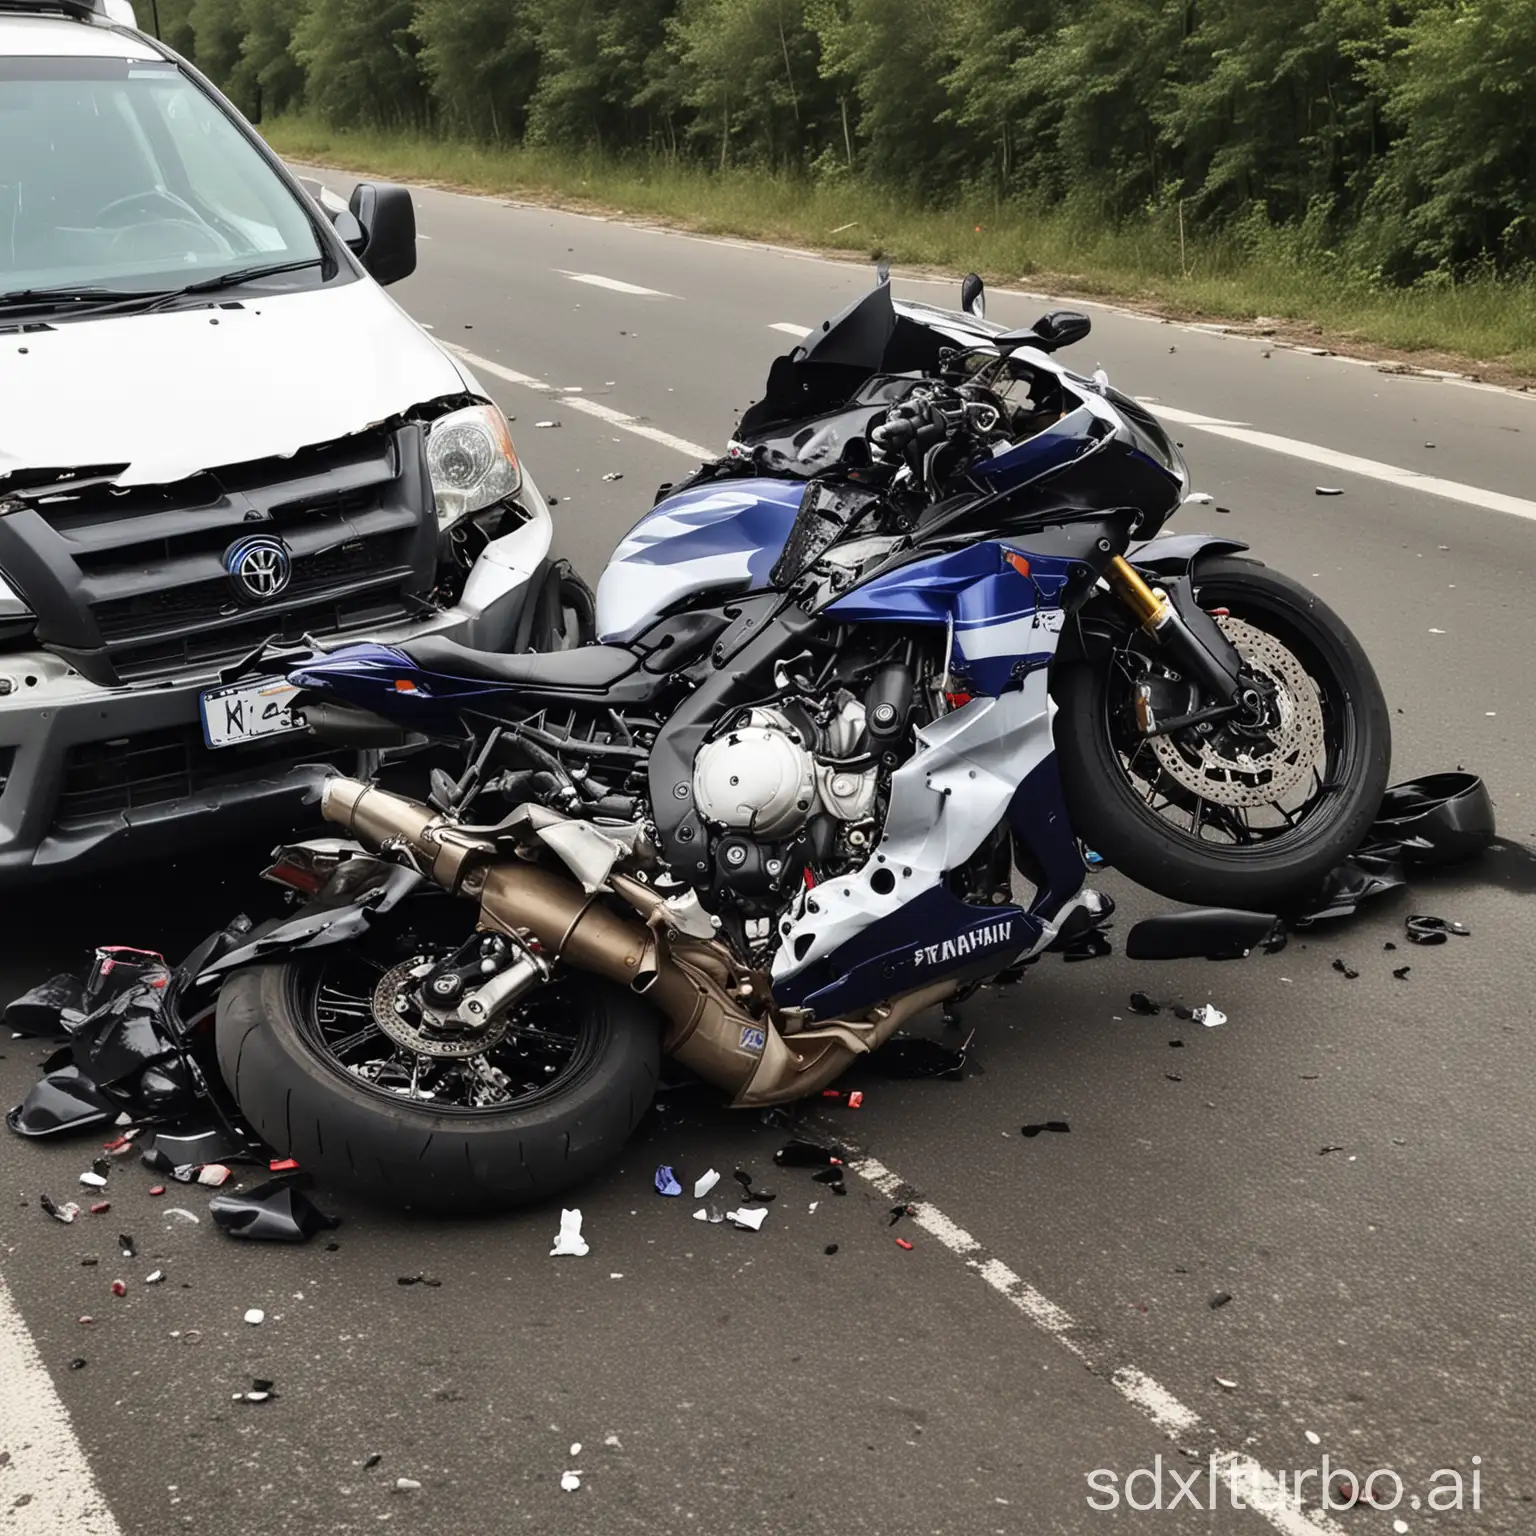 Motorcycle-Accident-Yamaha-R1-Crashes-into-Truck